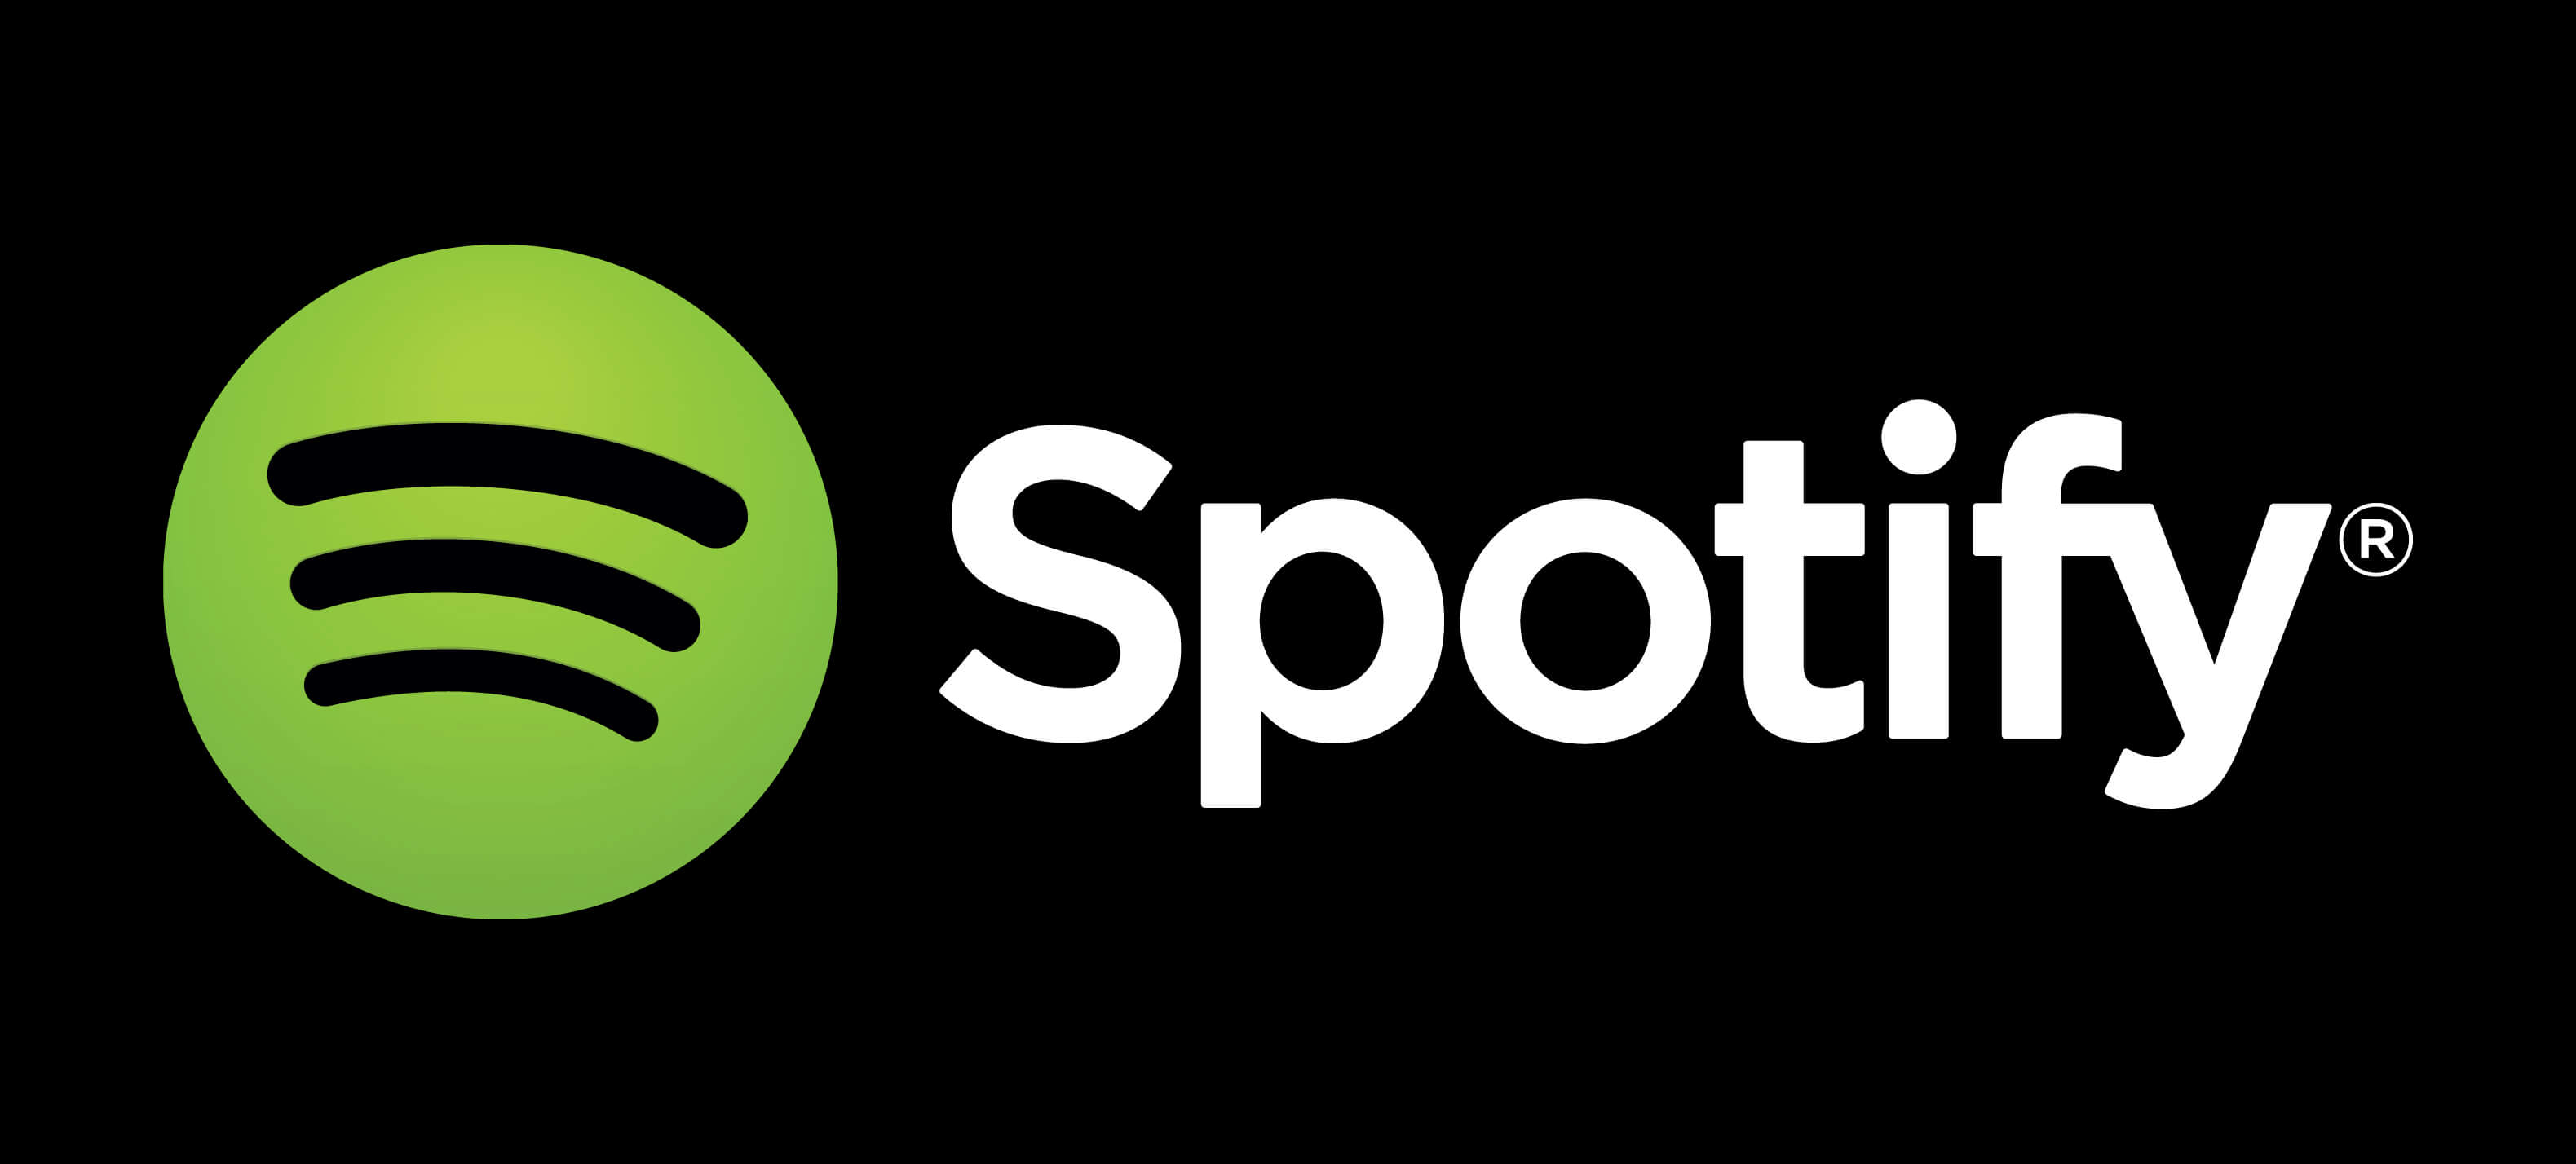 listen to spotify online browser